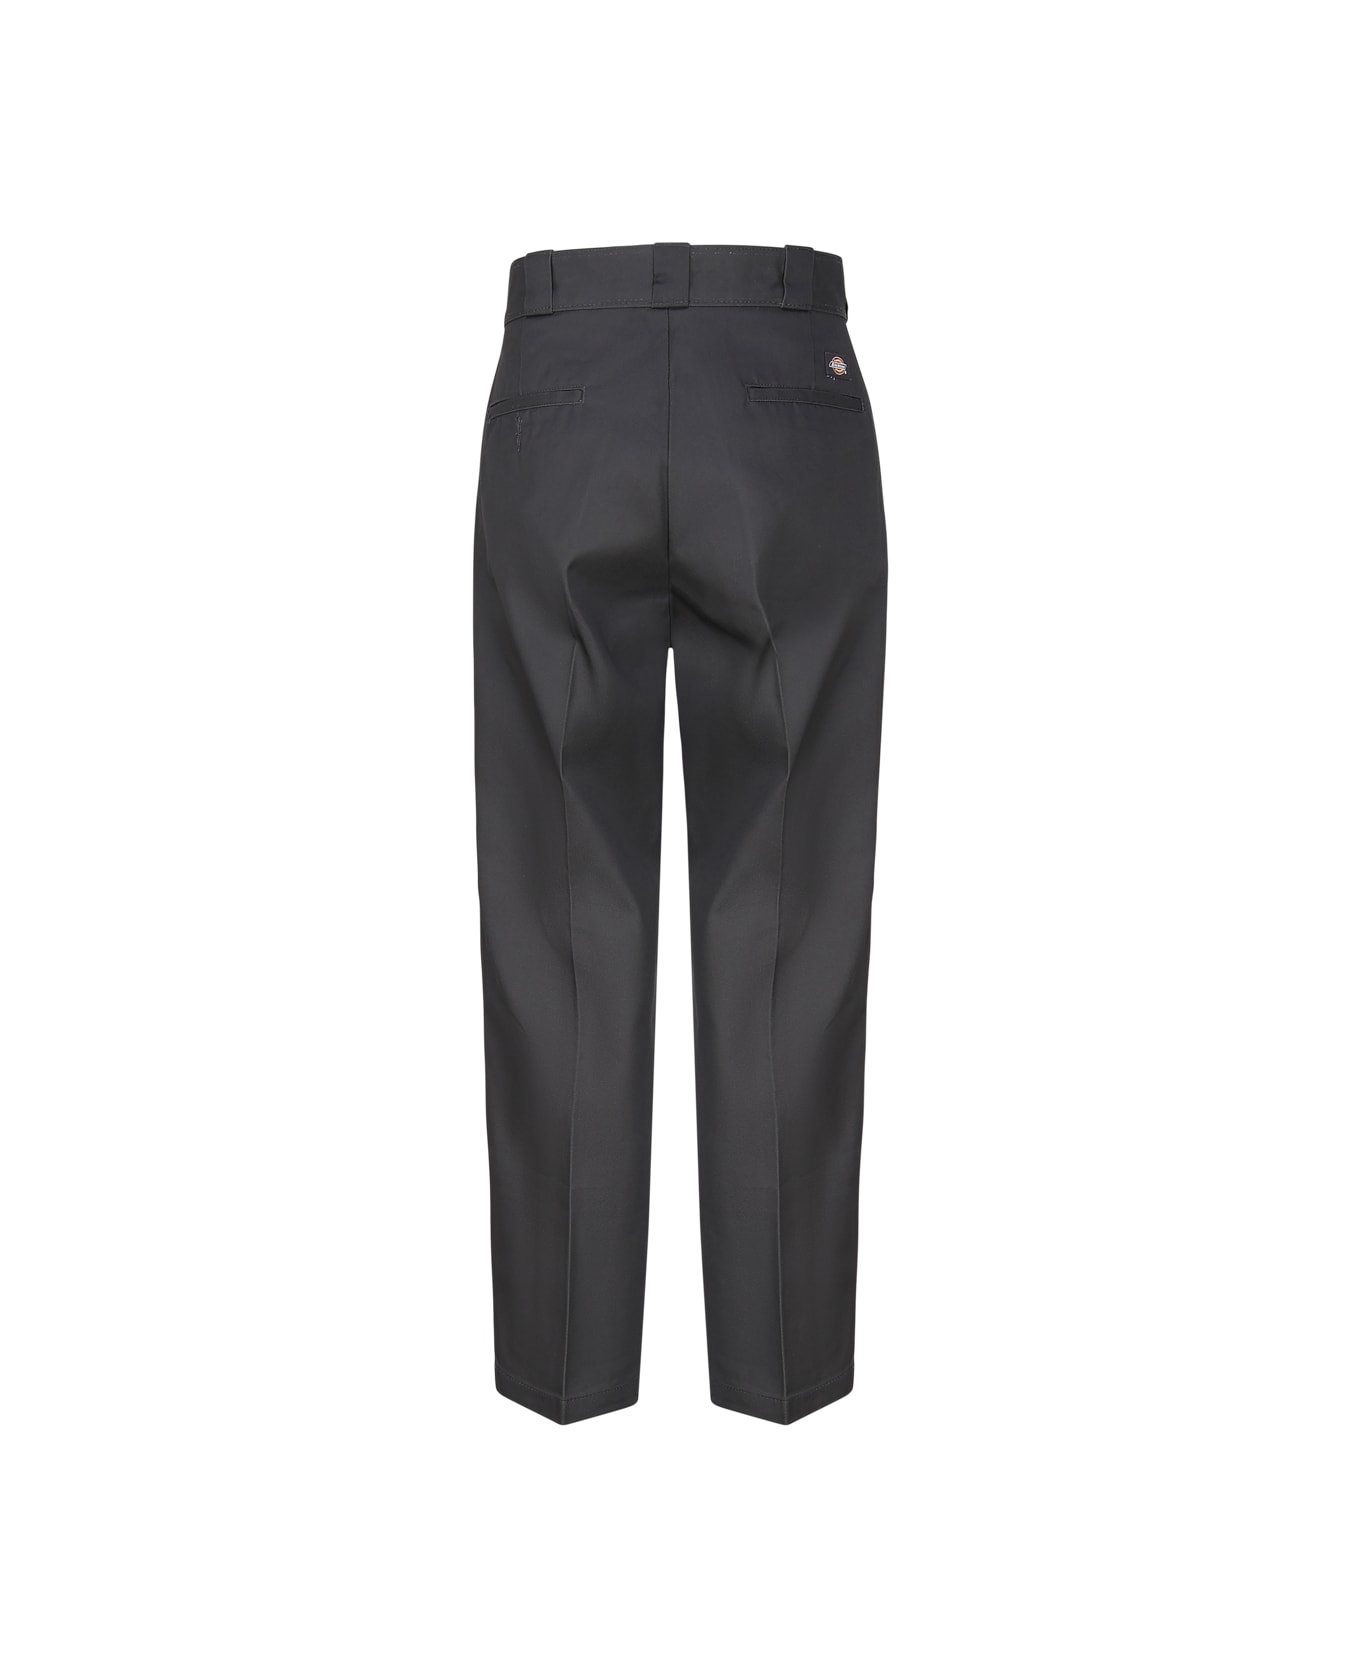 Dickies Work Trousers 874 - Charcoal grey ボトムス